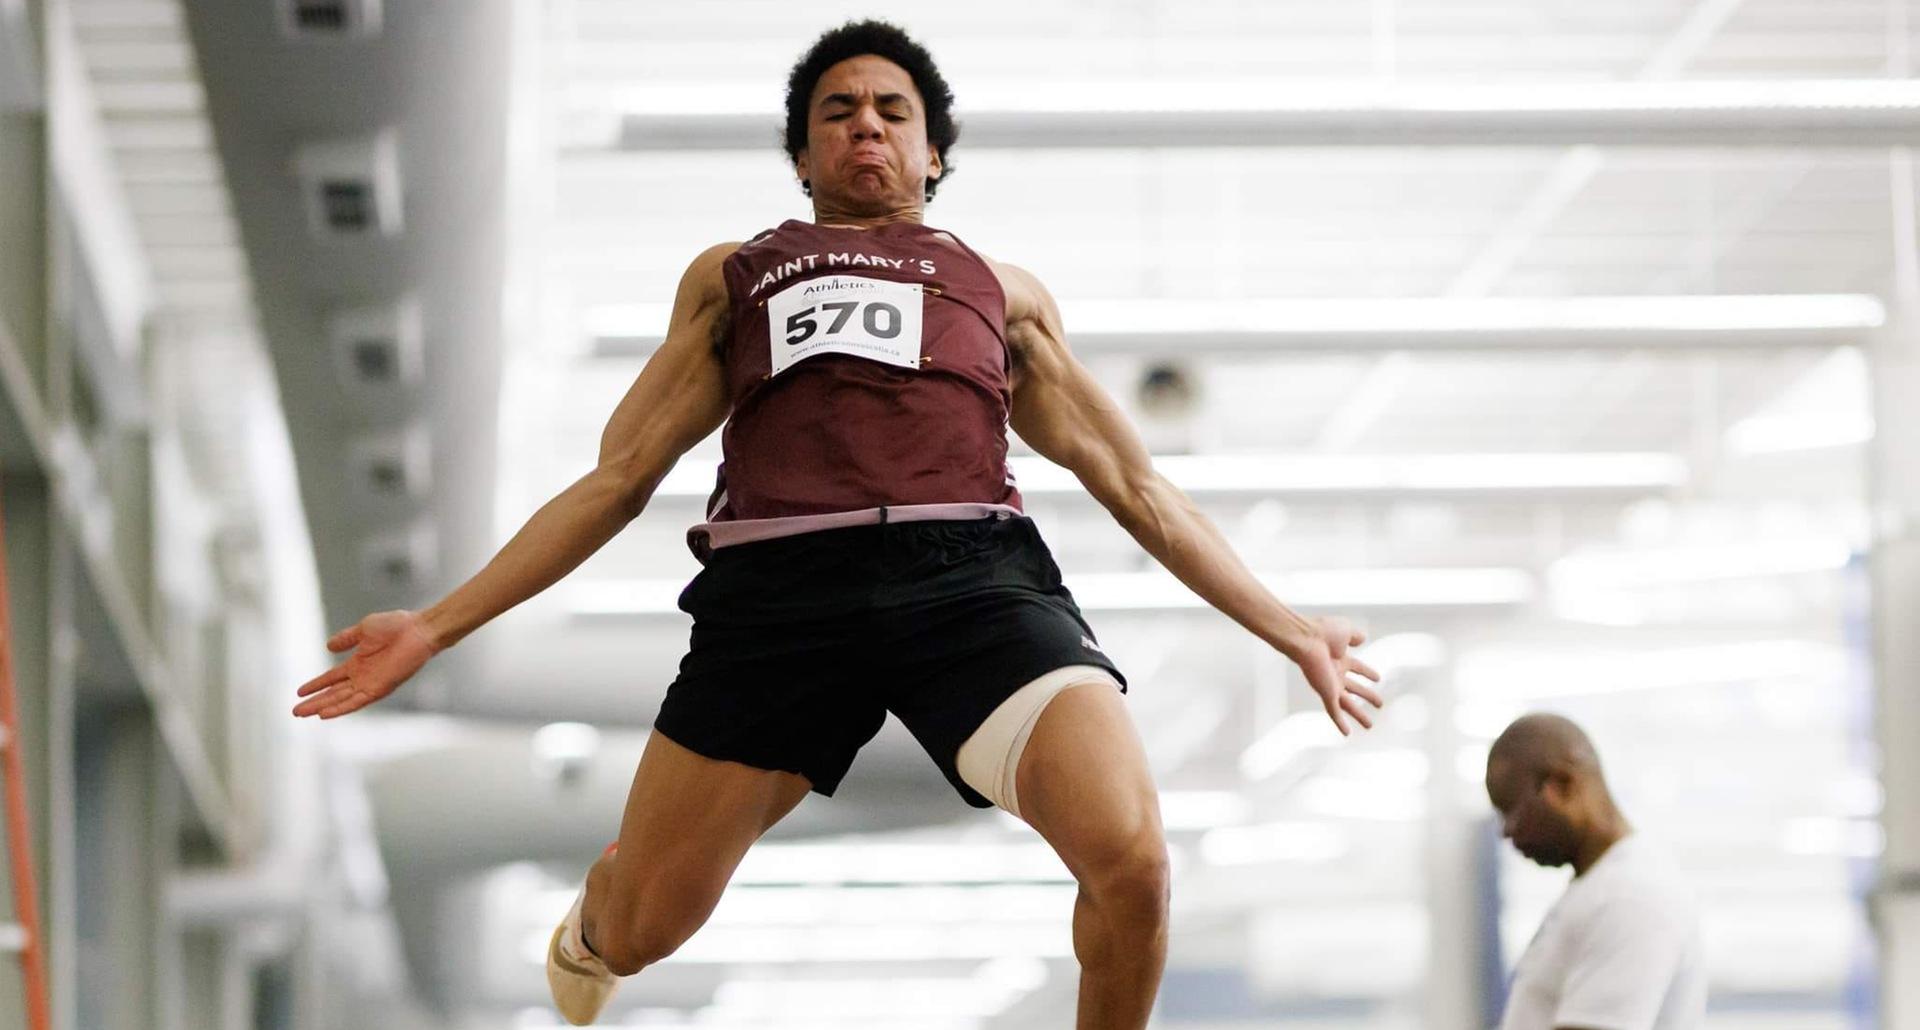 Huskies first year Dante Isadore jumped a massive personal best of 6.73m, taking the win in the men's Long Jump at the Athletics NS Indoor Open. (Photo by Paul Morris / Athletics Nova Scotia)